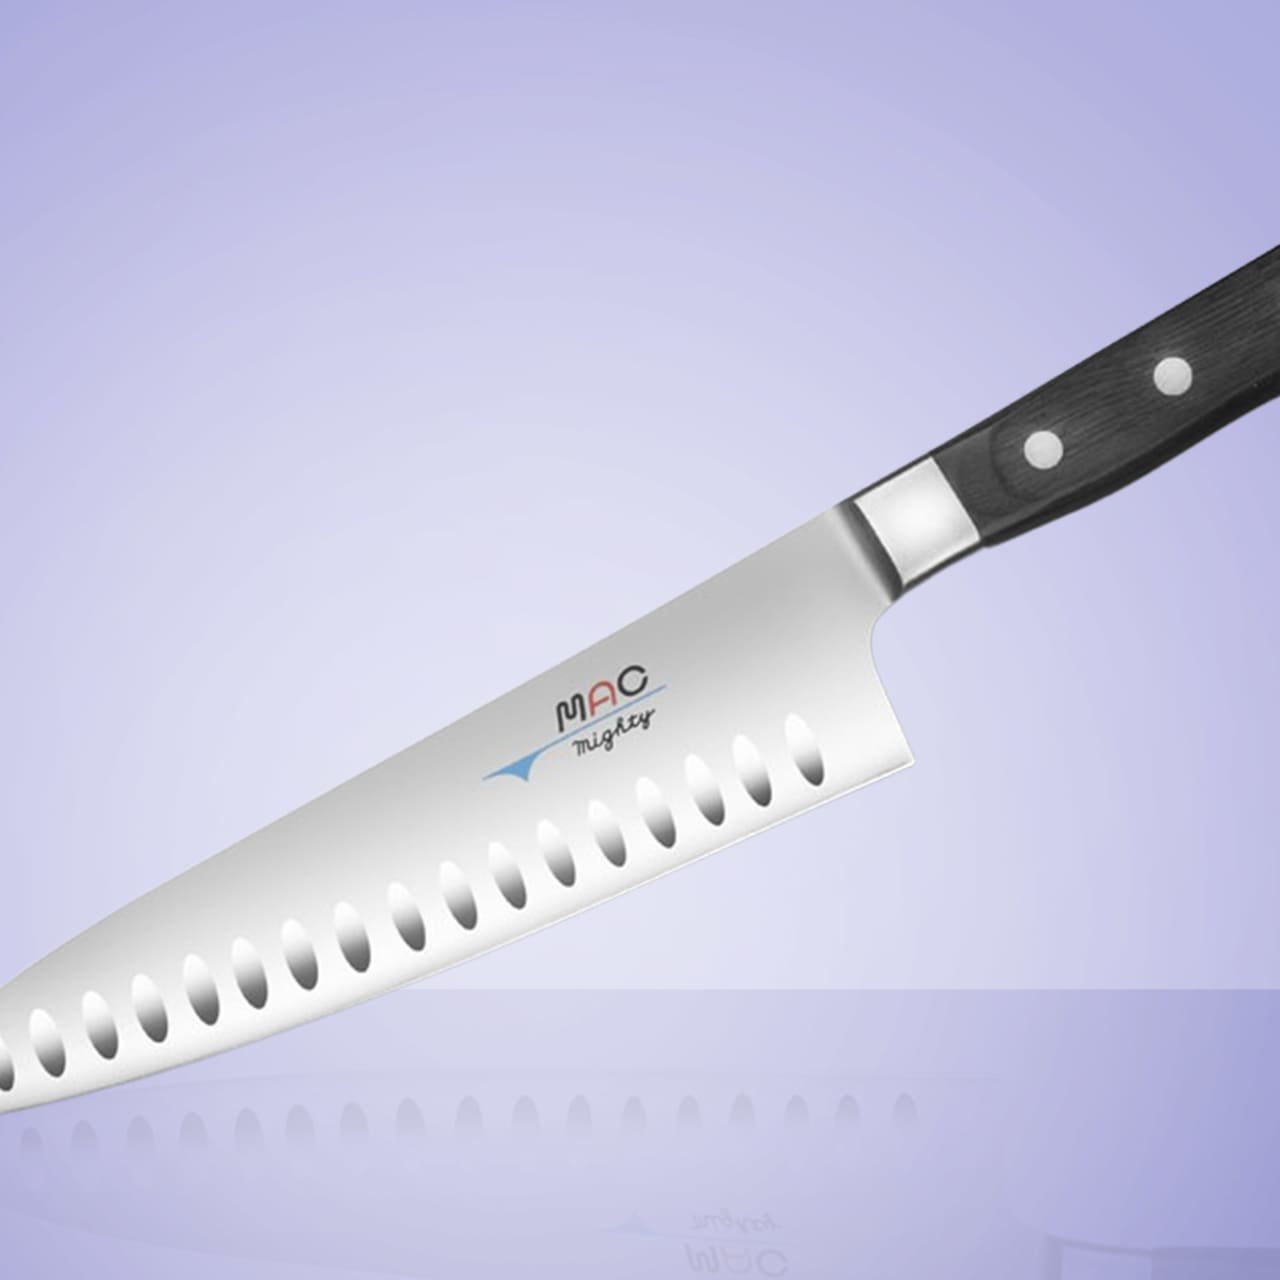 The Best Chef's Knives According to Professional Chefs 2023